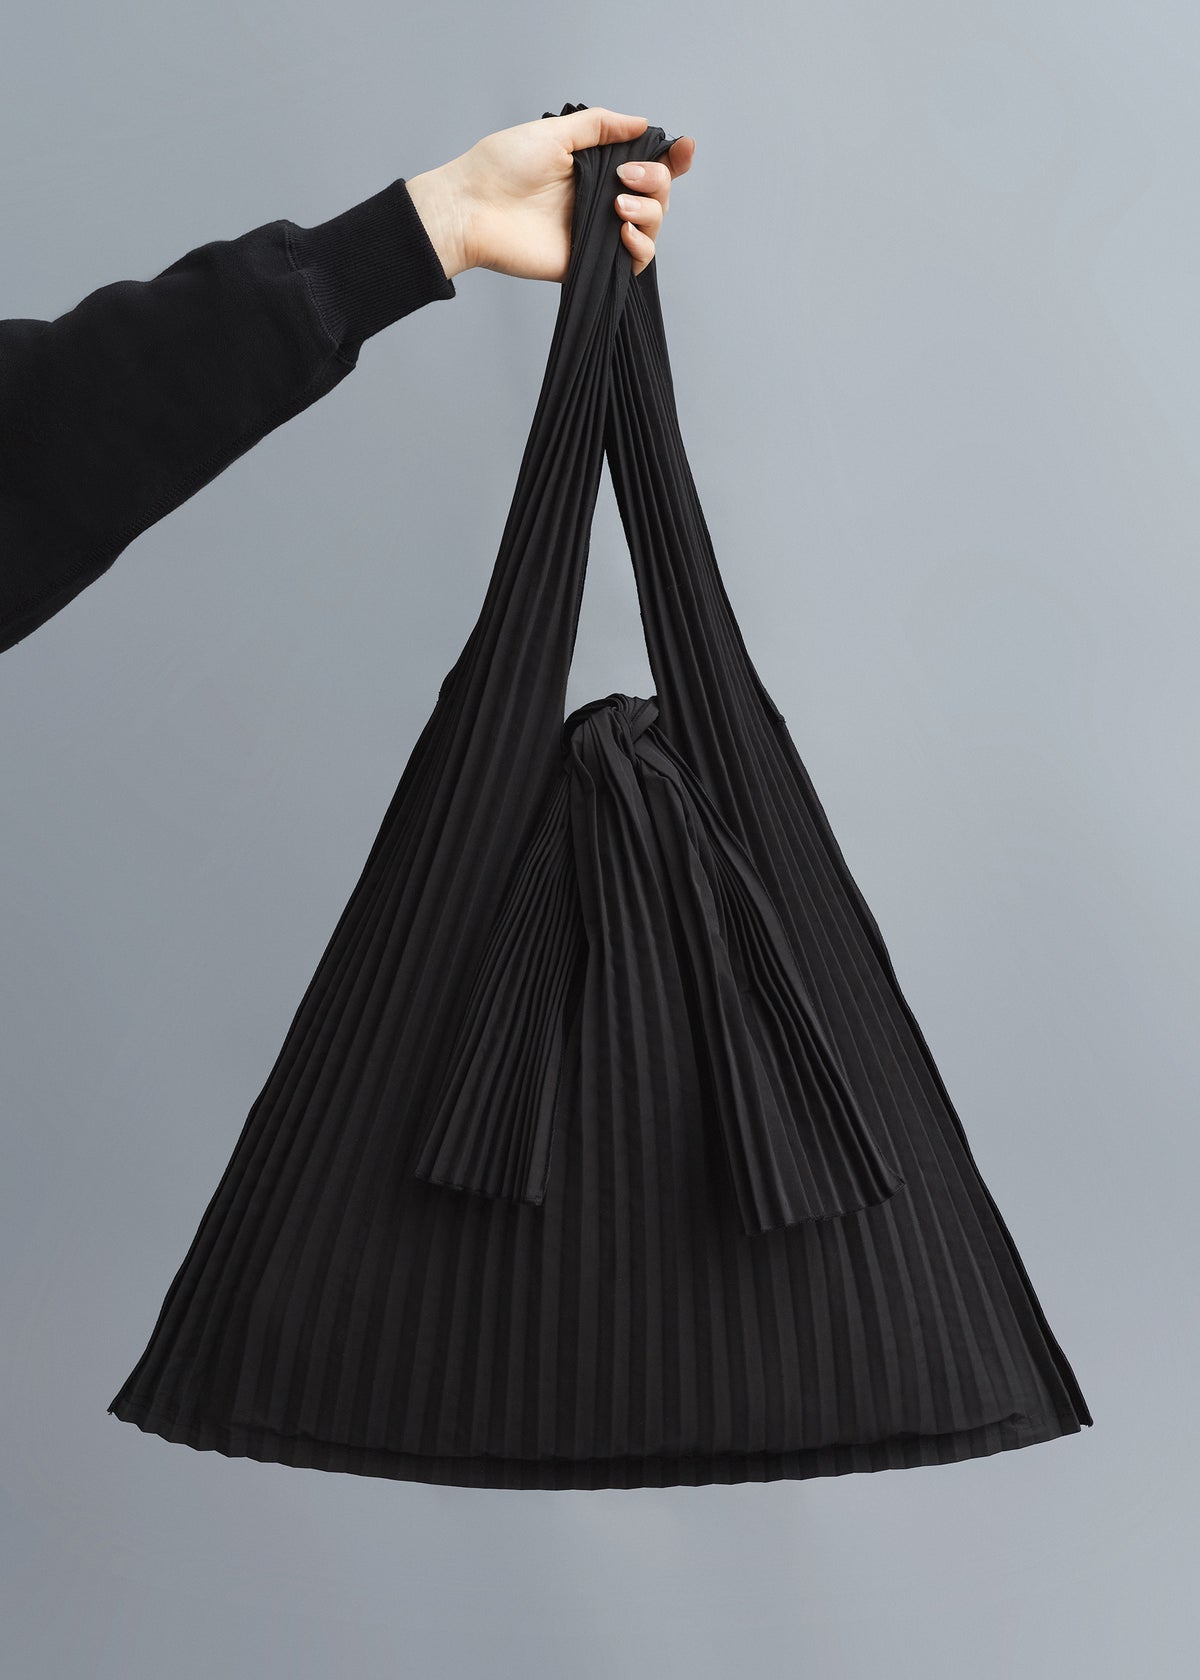 BUTOME. Large pleated bag. Plain